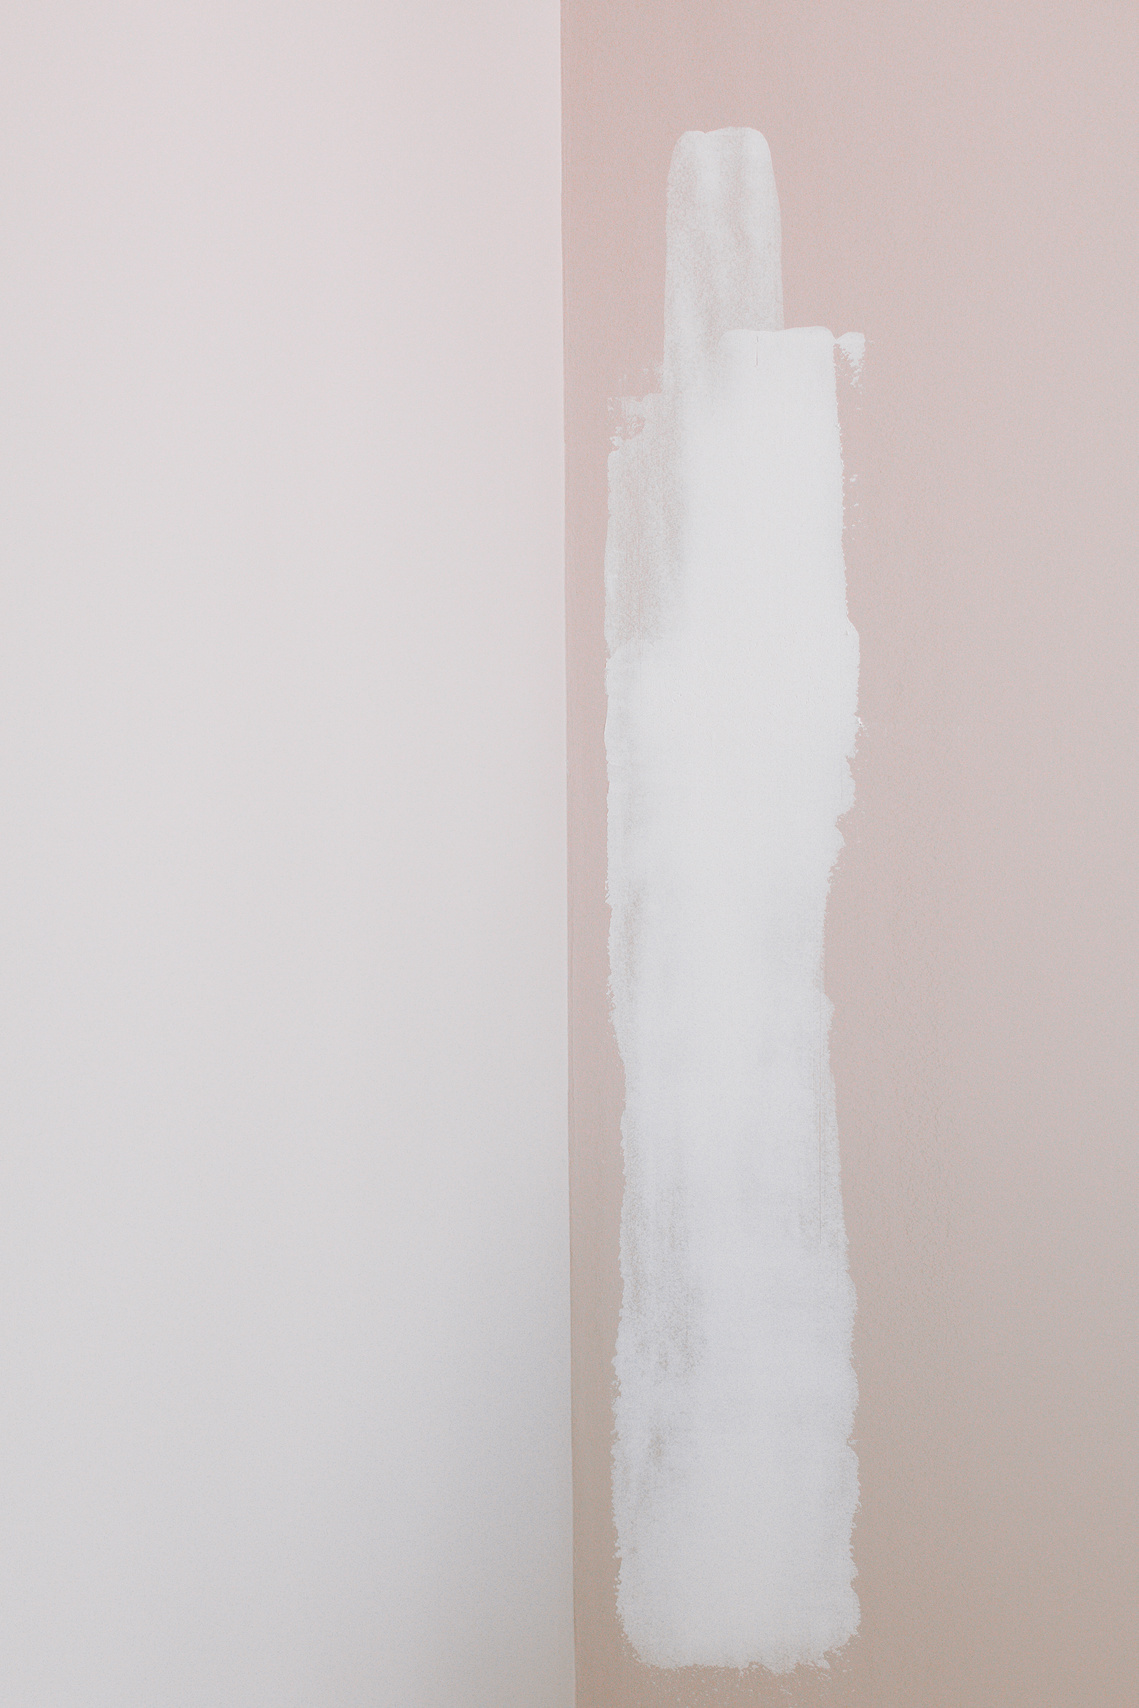 White Paint On Wall